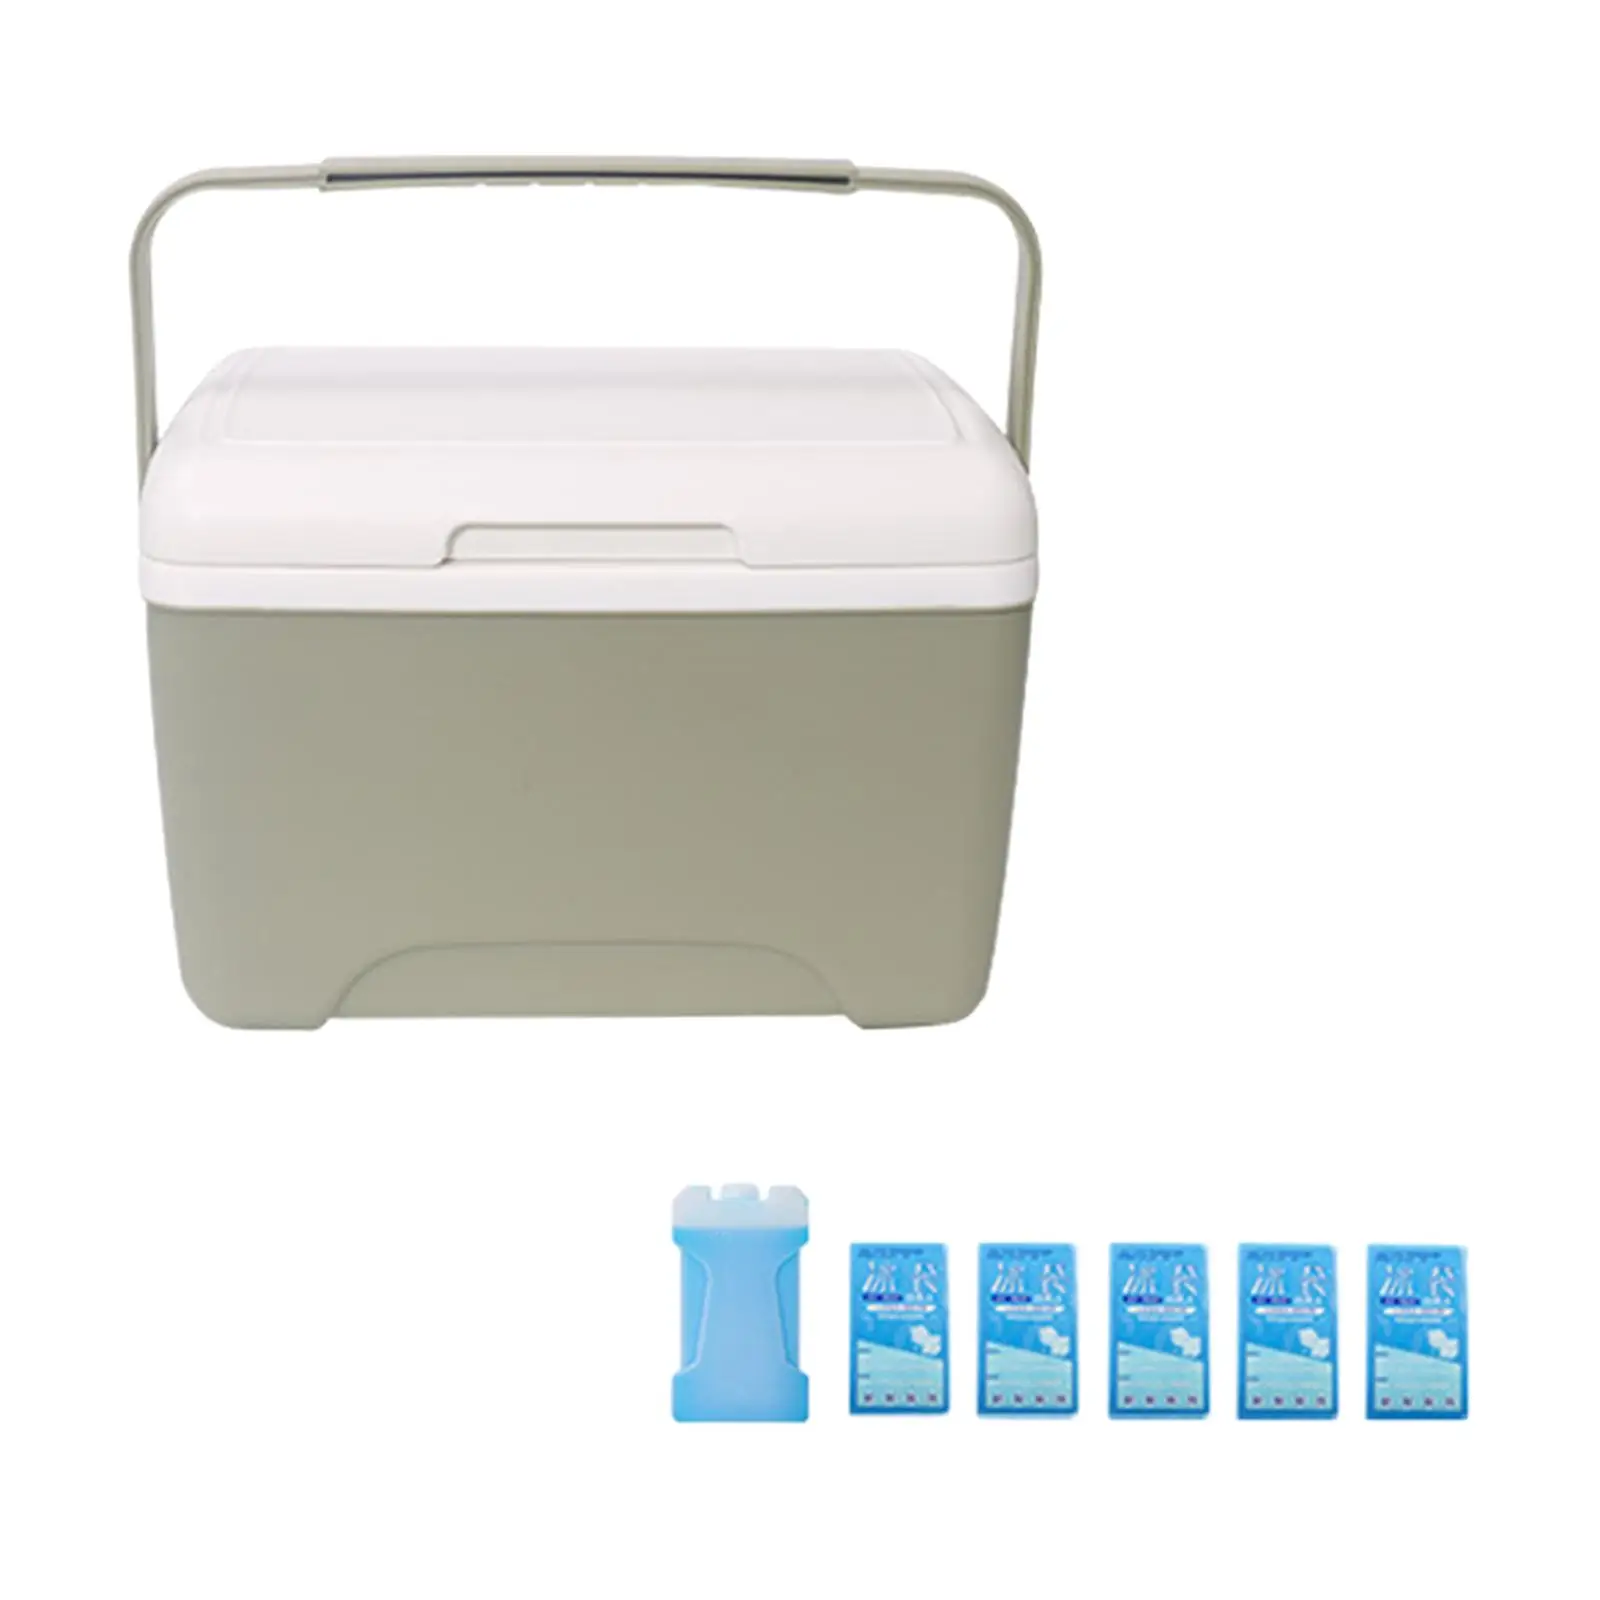 8L Insulated Cooler with Handles Lightweight Multipurpose Drink Carrier Cool Box